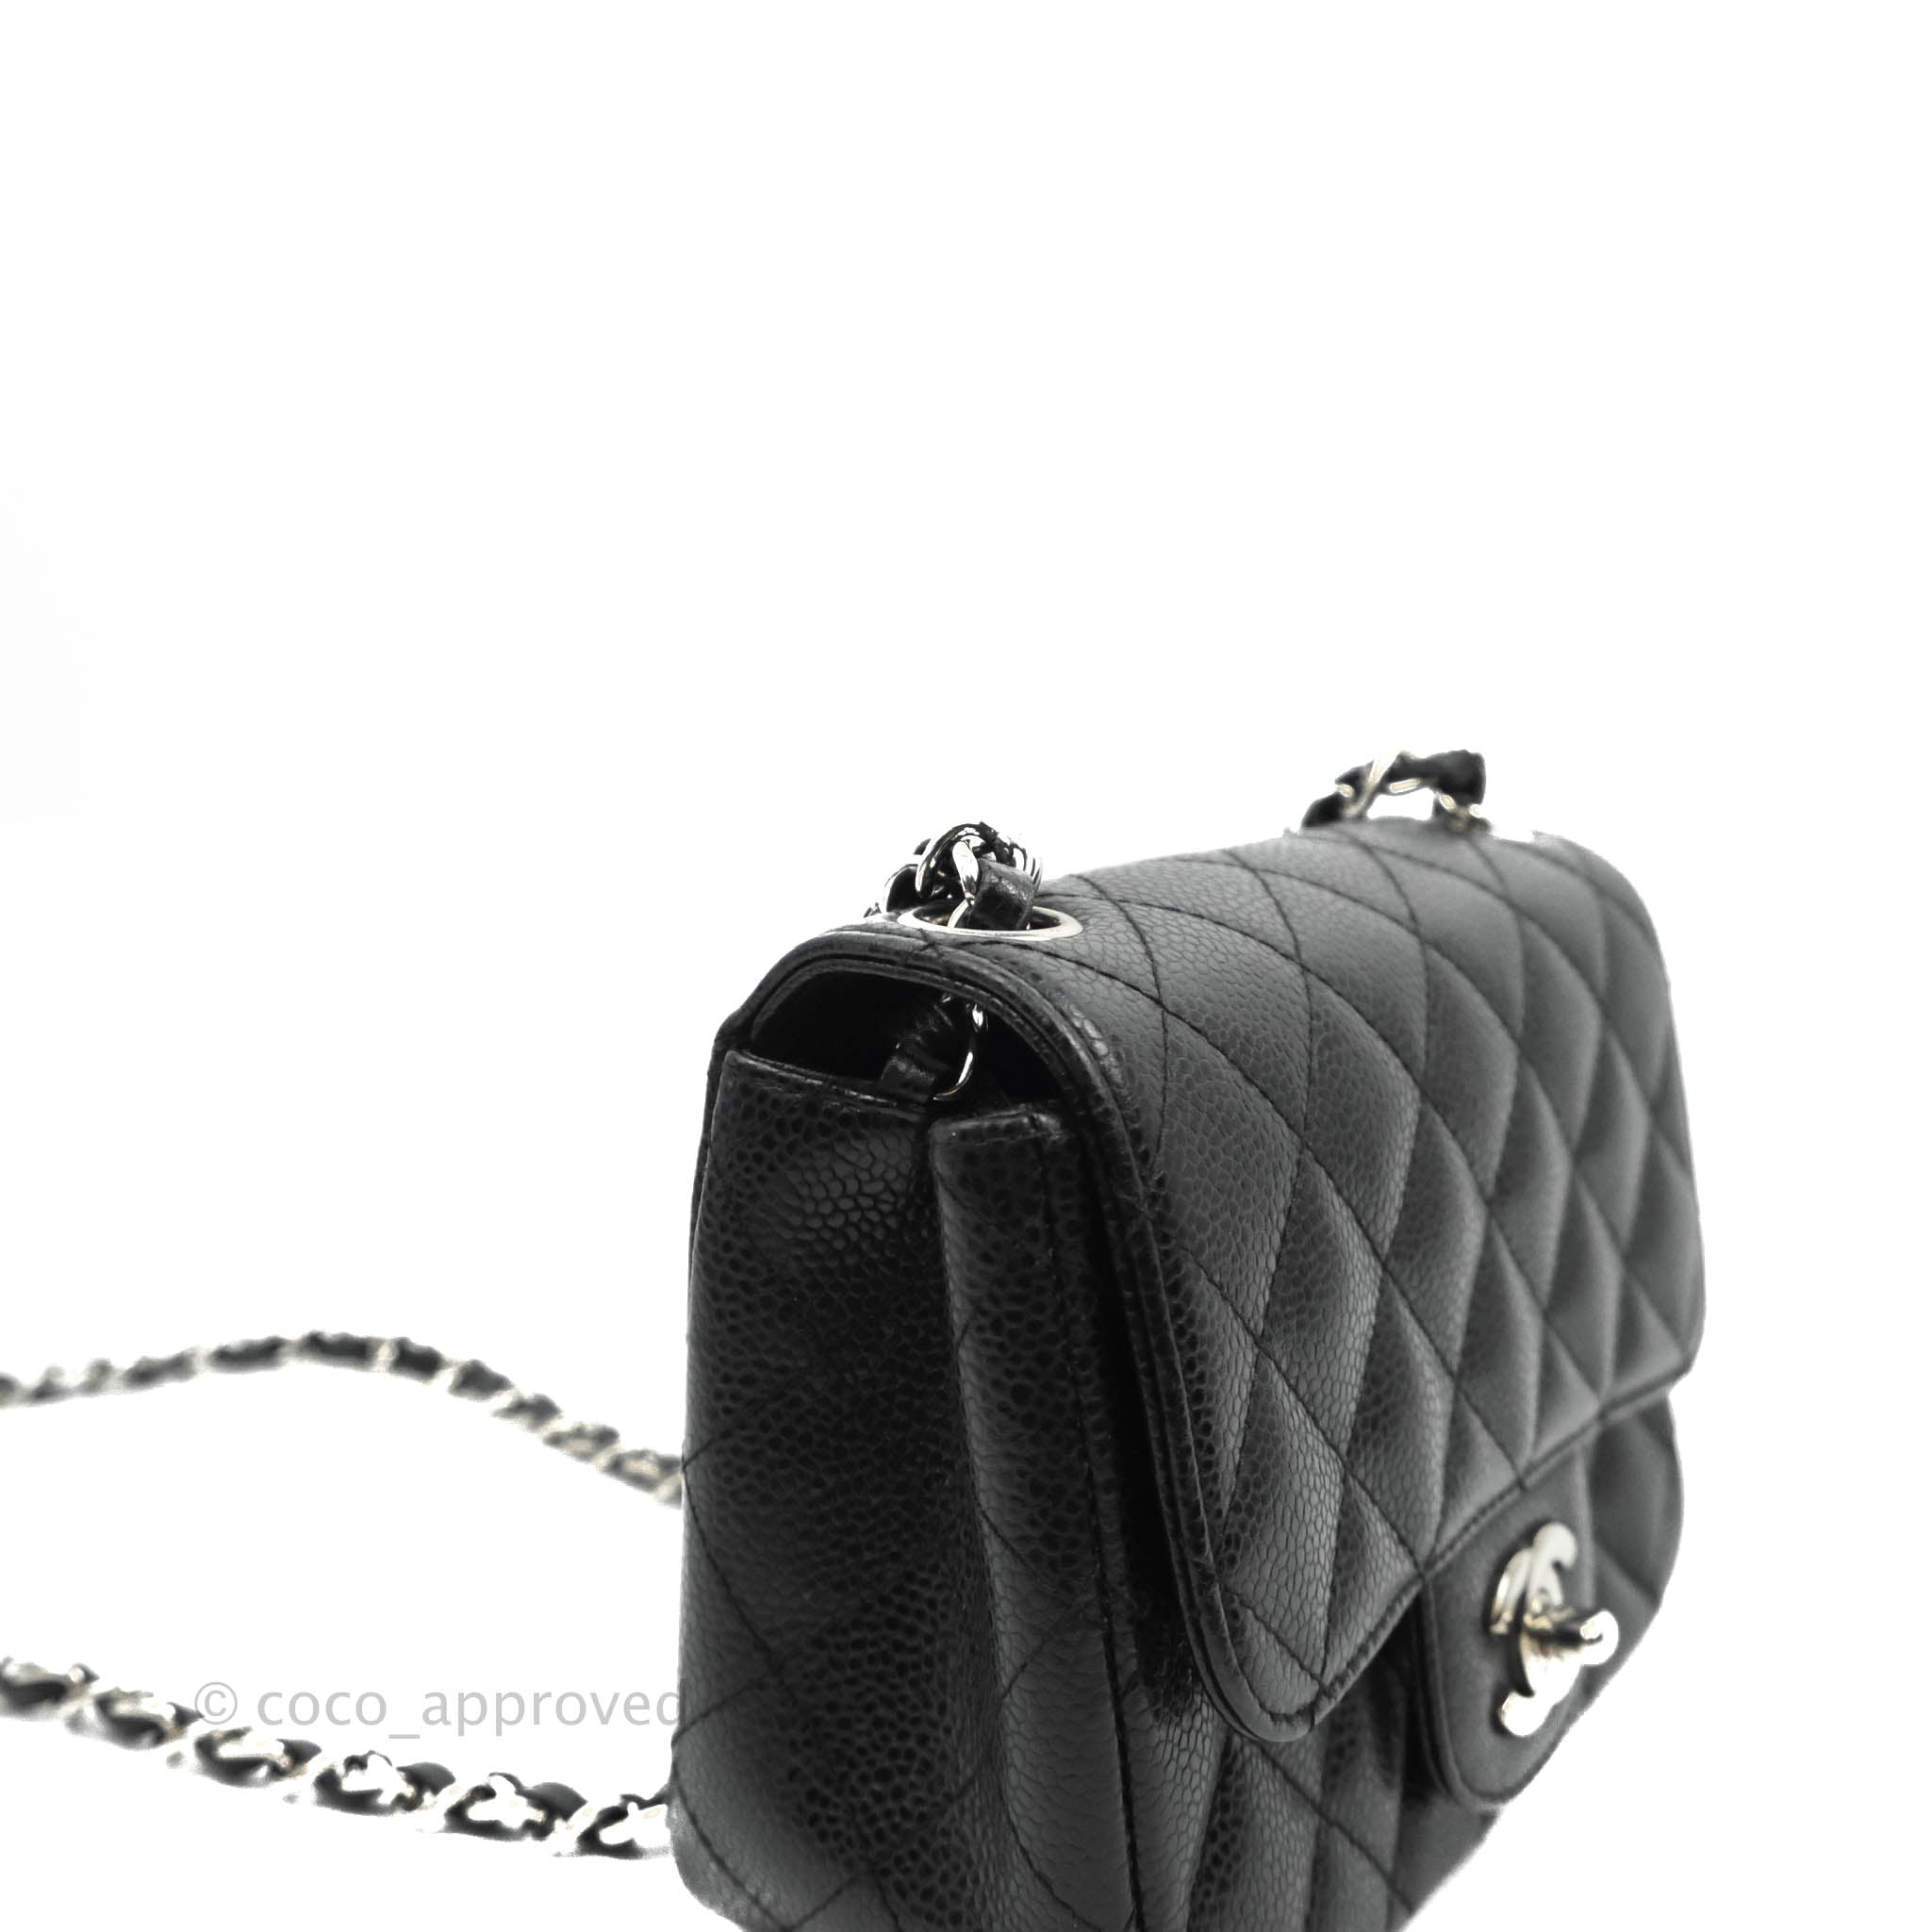 Chanel Vintage Black Rounded Classic Quilted Mini Flap Bag – Boutique Patina